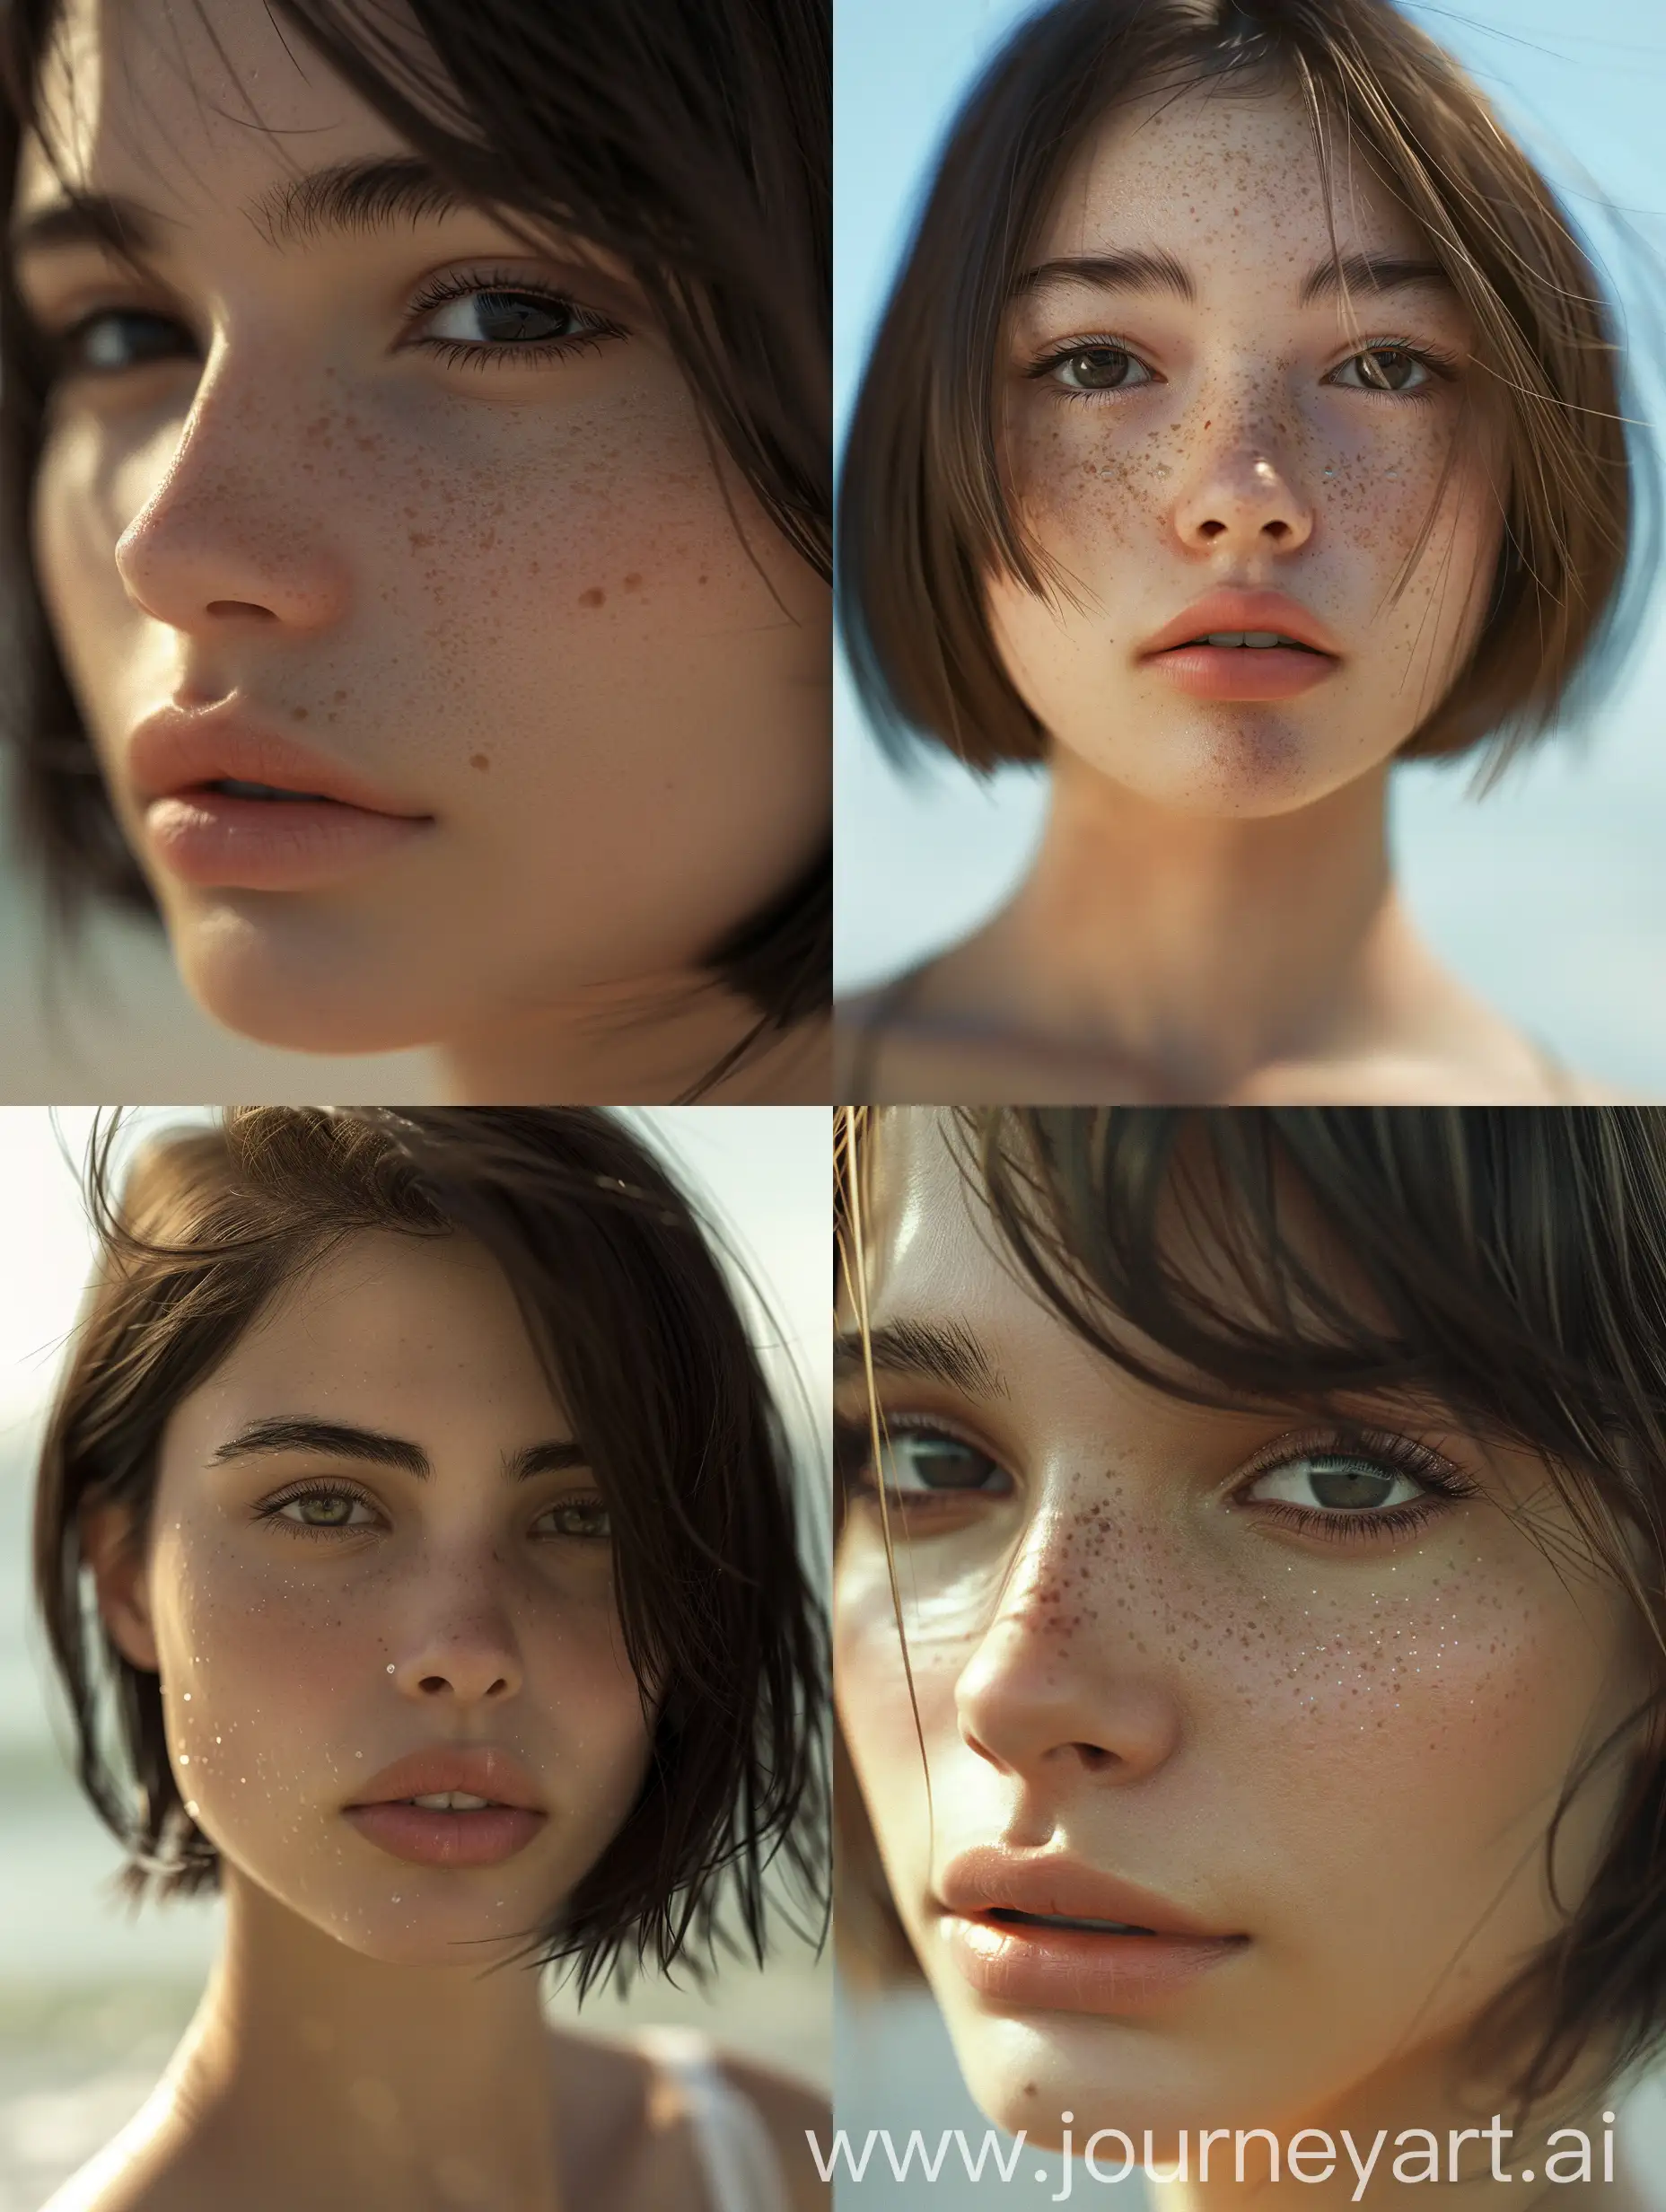 **elegantism, insane detail, ((BEST QUALITY)), ((masterpiece)), ((DETAILED)), PERFECT FACE, 19 years old, mixed ethnicity (LATIN AND SCANDINAVIAN), delicate chin, delicate nose, beautiful black eyes, short straight brown hair, ON THE VERGE OF THE SEA, Lone hair on face, PORTRAIT PHOTOGRAPHY, BEAUTIFUL, SUNLIGHT, SOFT LIGHT, REAL FUJIFILM SUPERIA PHOTOGRAPHY, FULL HD, PHOTOGRAPHED ON A CANON EOS R5 F1 2 ISO100 35MM, HYPER-MAXIMALISM, INTRIQUE, INSANELY DETAILED, SHARP FOCUS, ULTRA REALISTIC, DSLR, UHS, 8K, FINAL RENDER